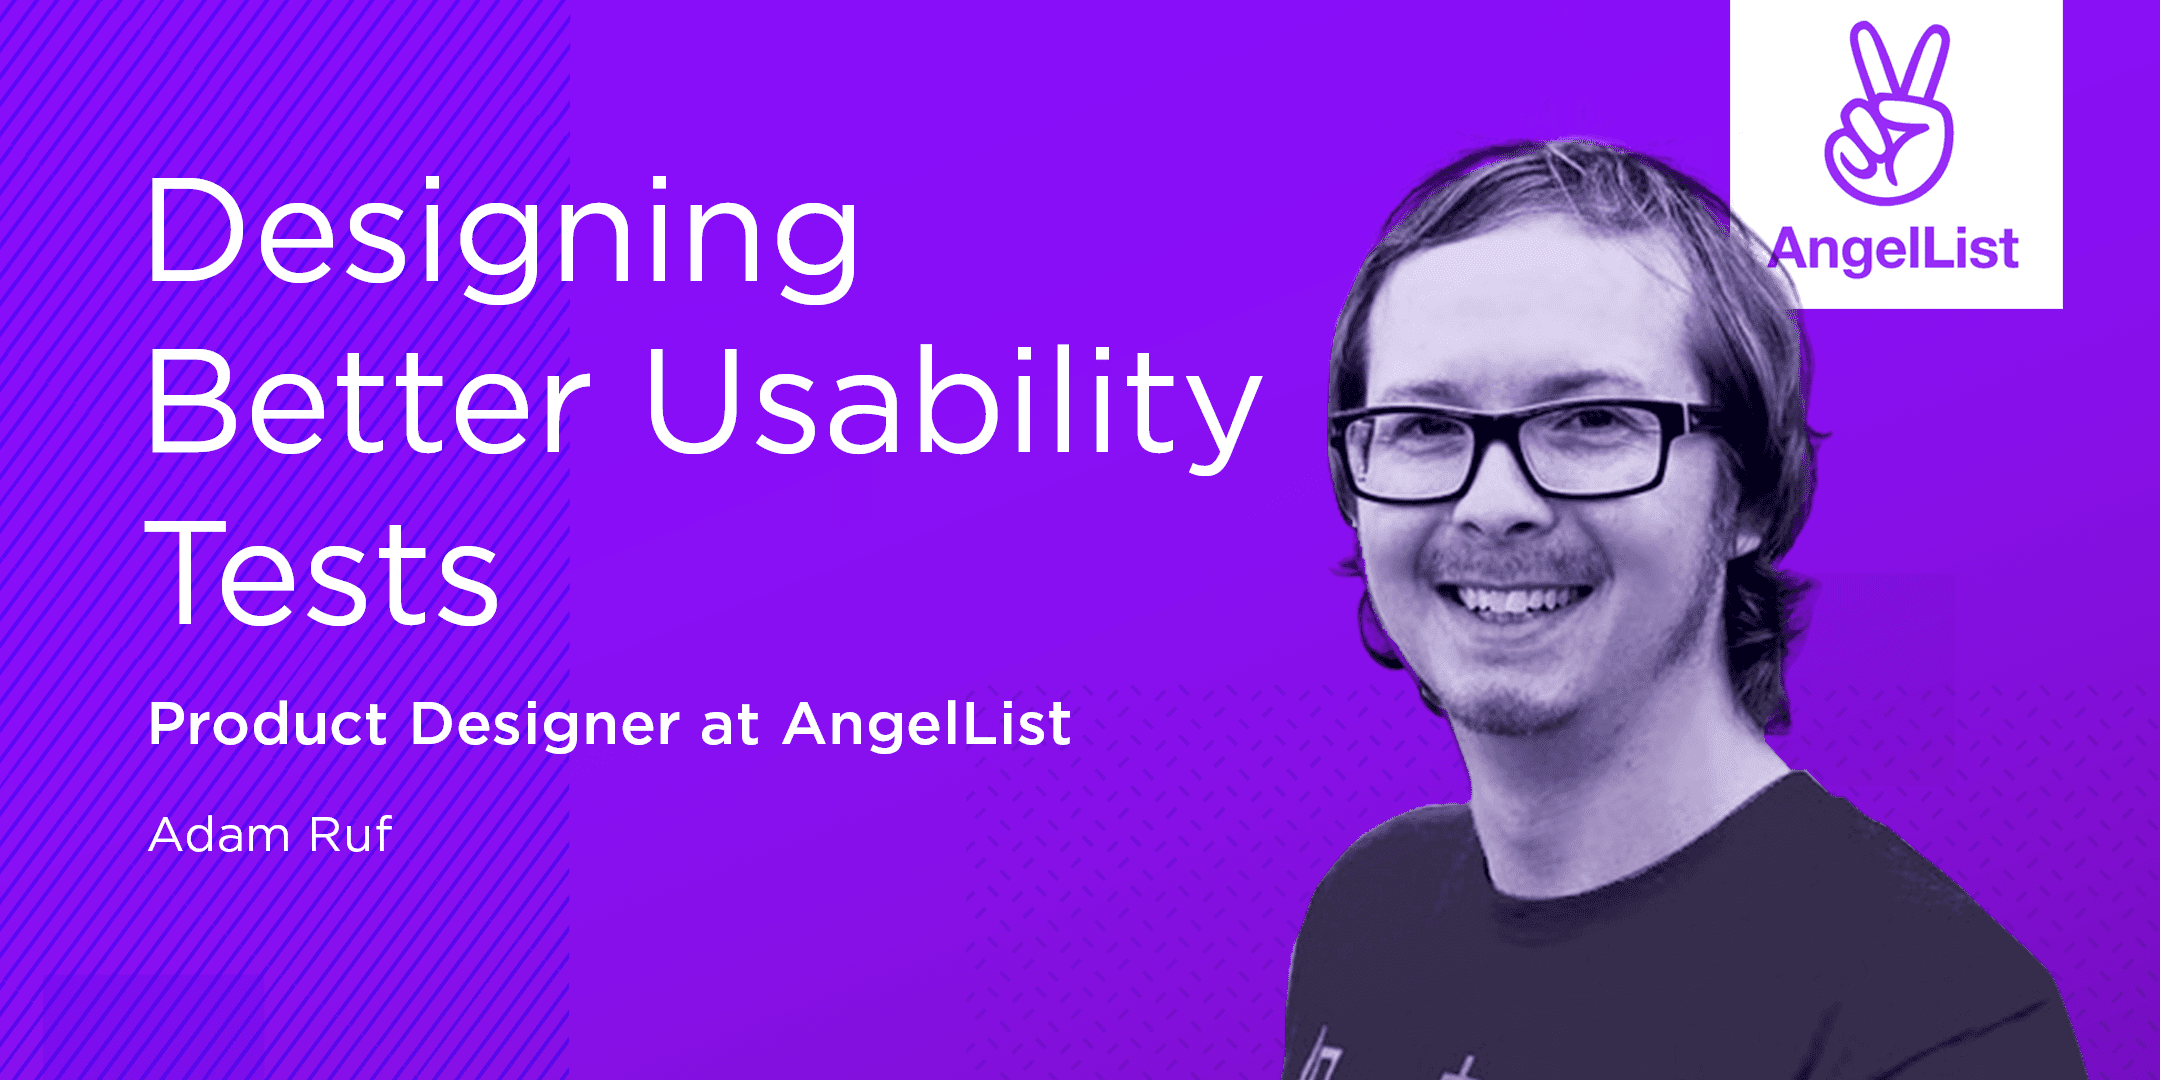 Designing Better Usability Tests, by Product Designer at AngelList